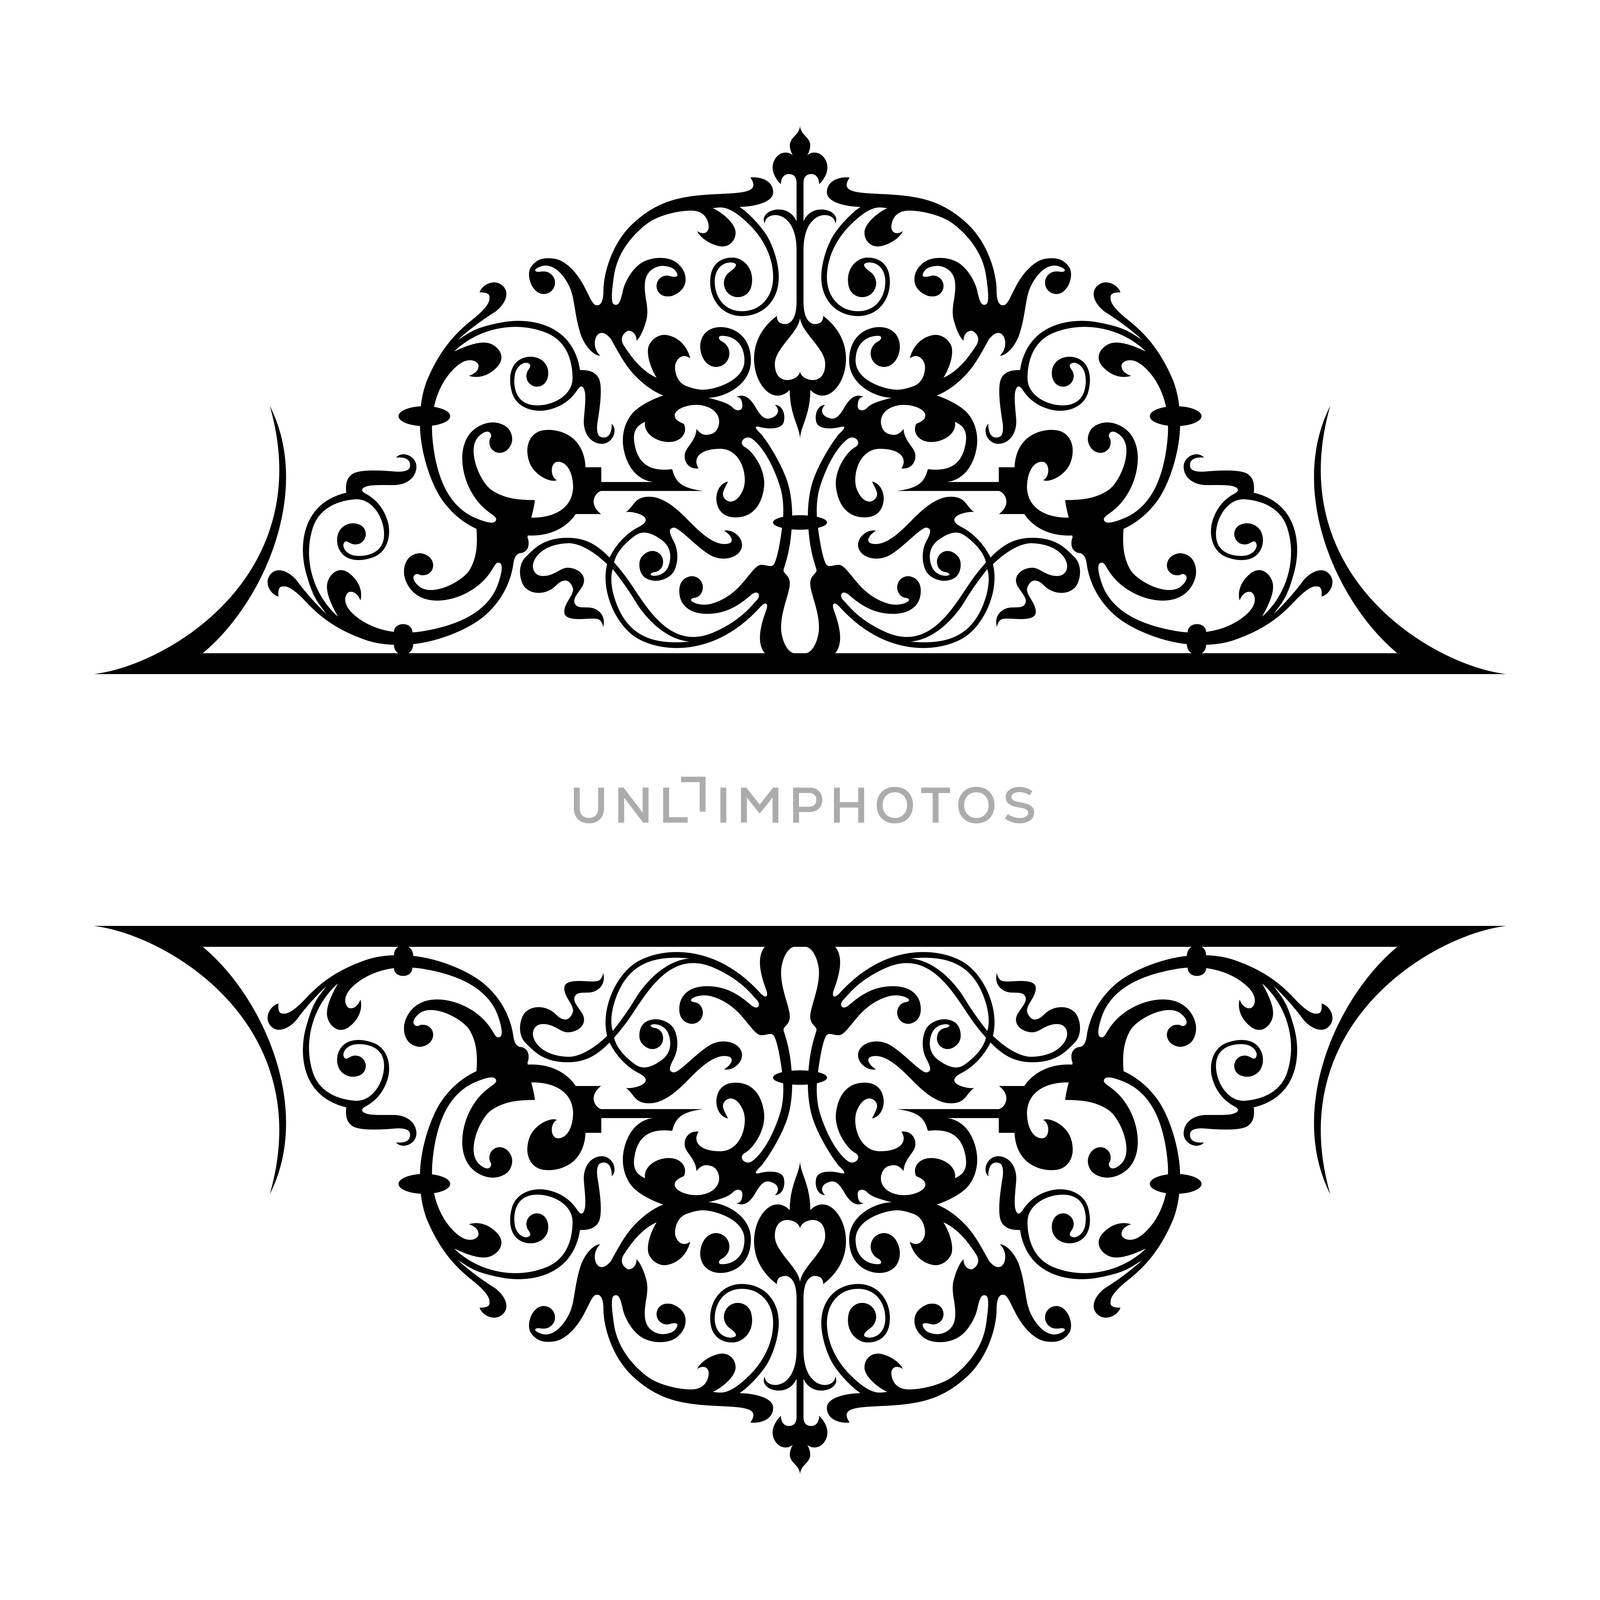 Abstract painted ornament vector illustration isolated on white